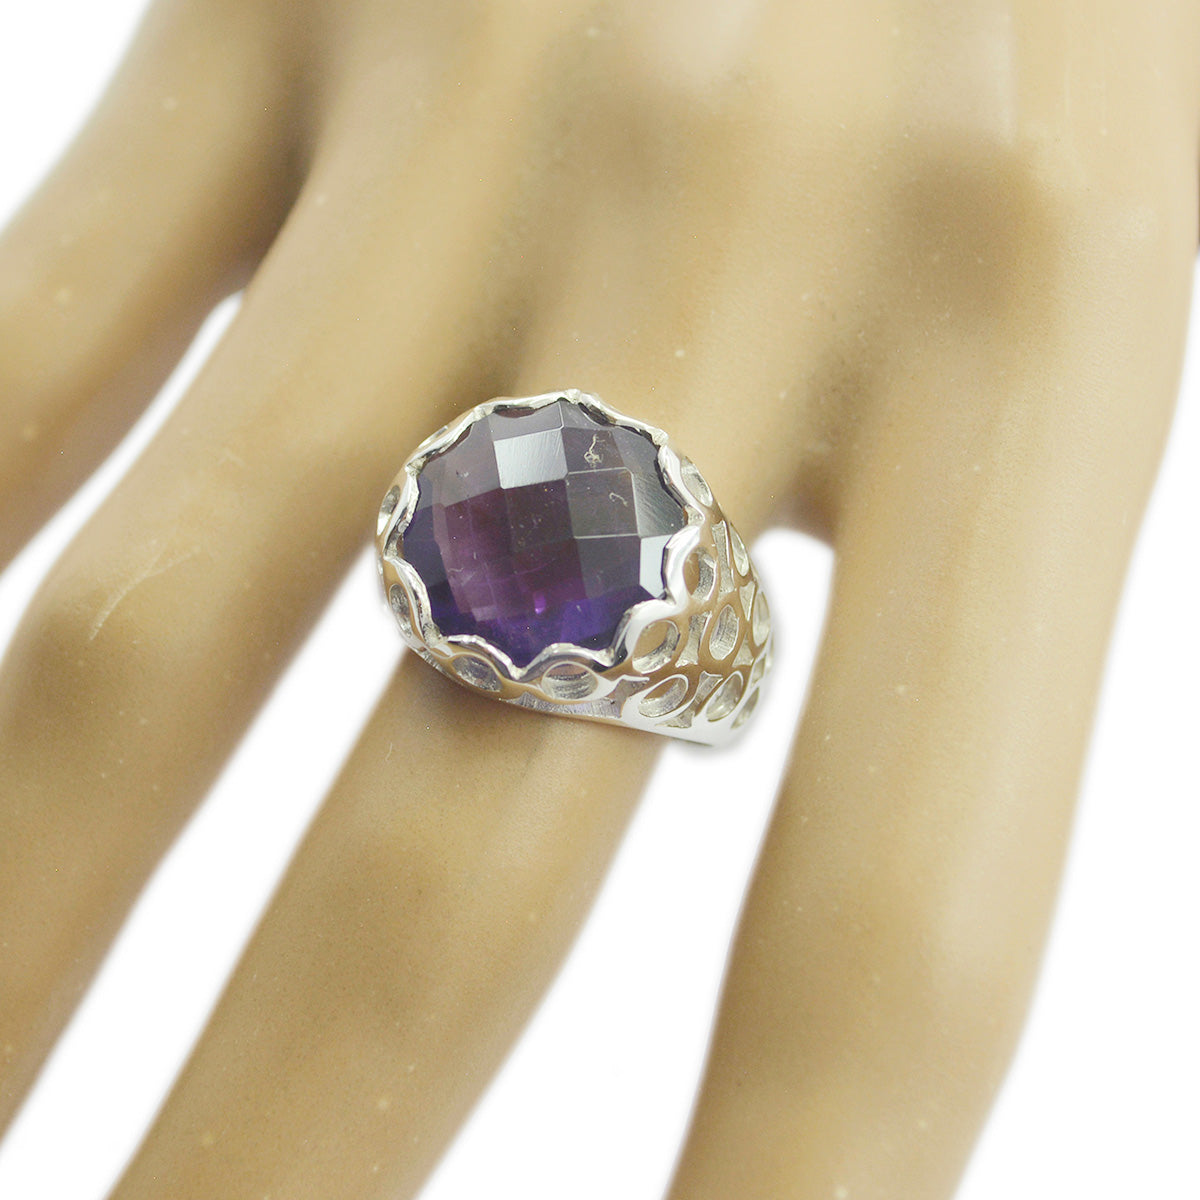 Aesthetic Gem Amethyst 925 Sterling Silver Ring Body Chain Jewelry